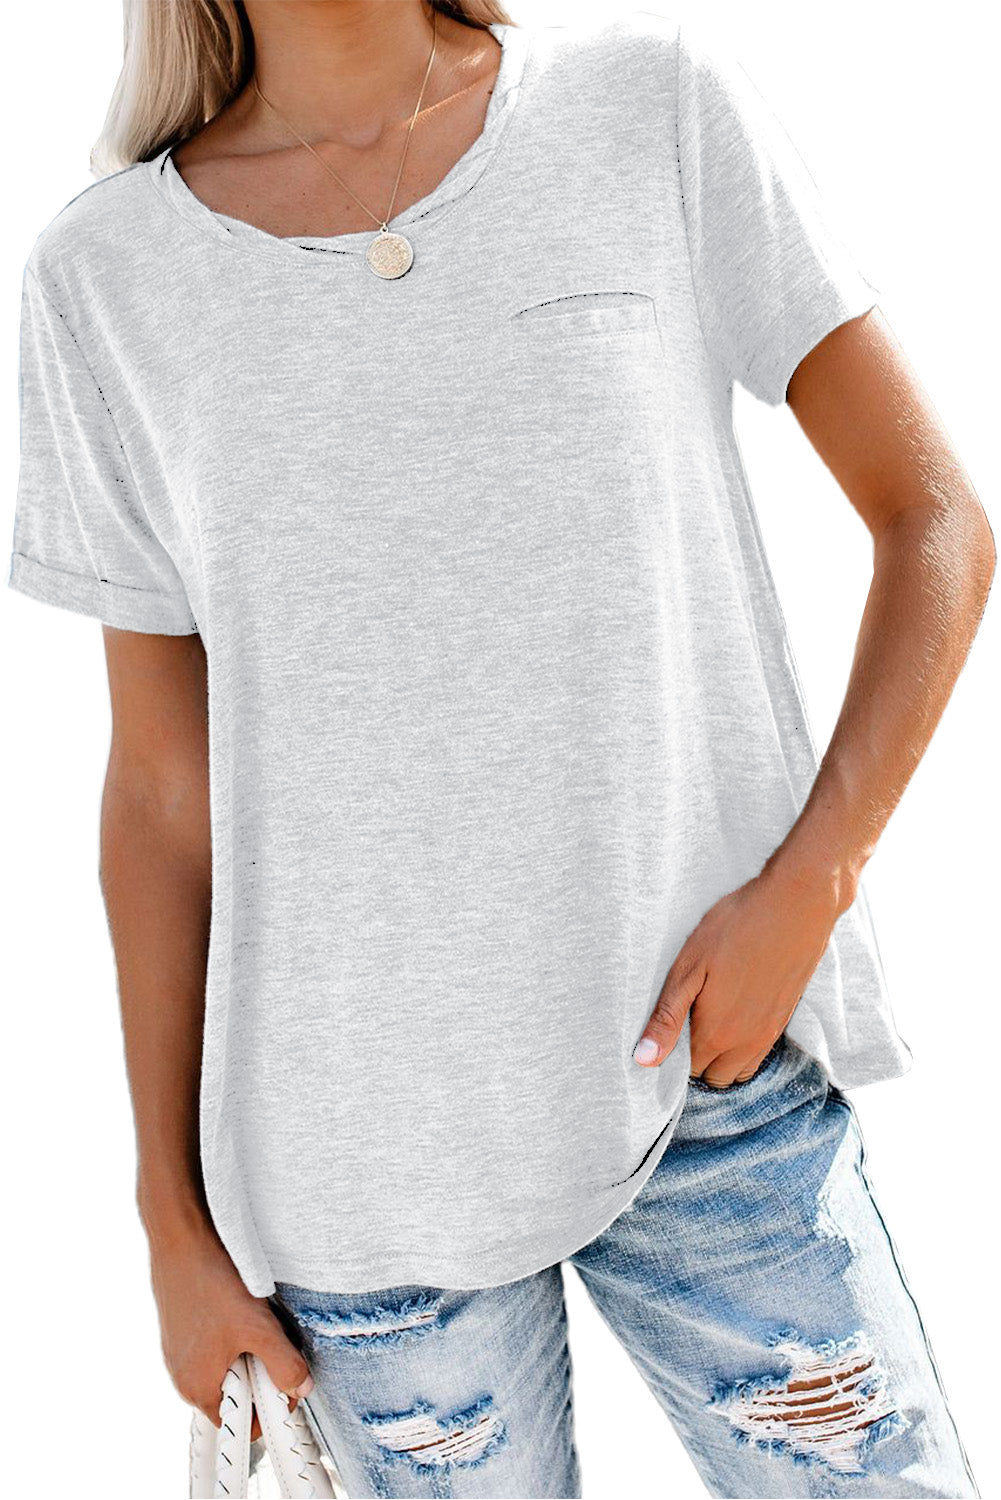 Solid Color Loose Rolled Short Sleeve T Shirt